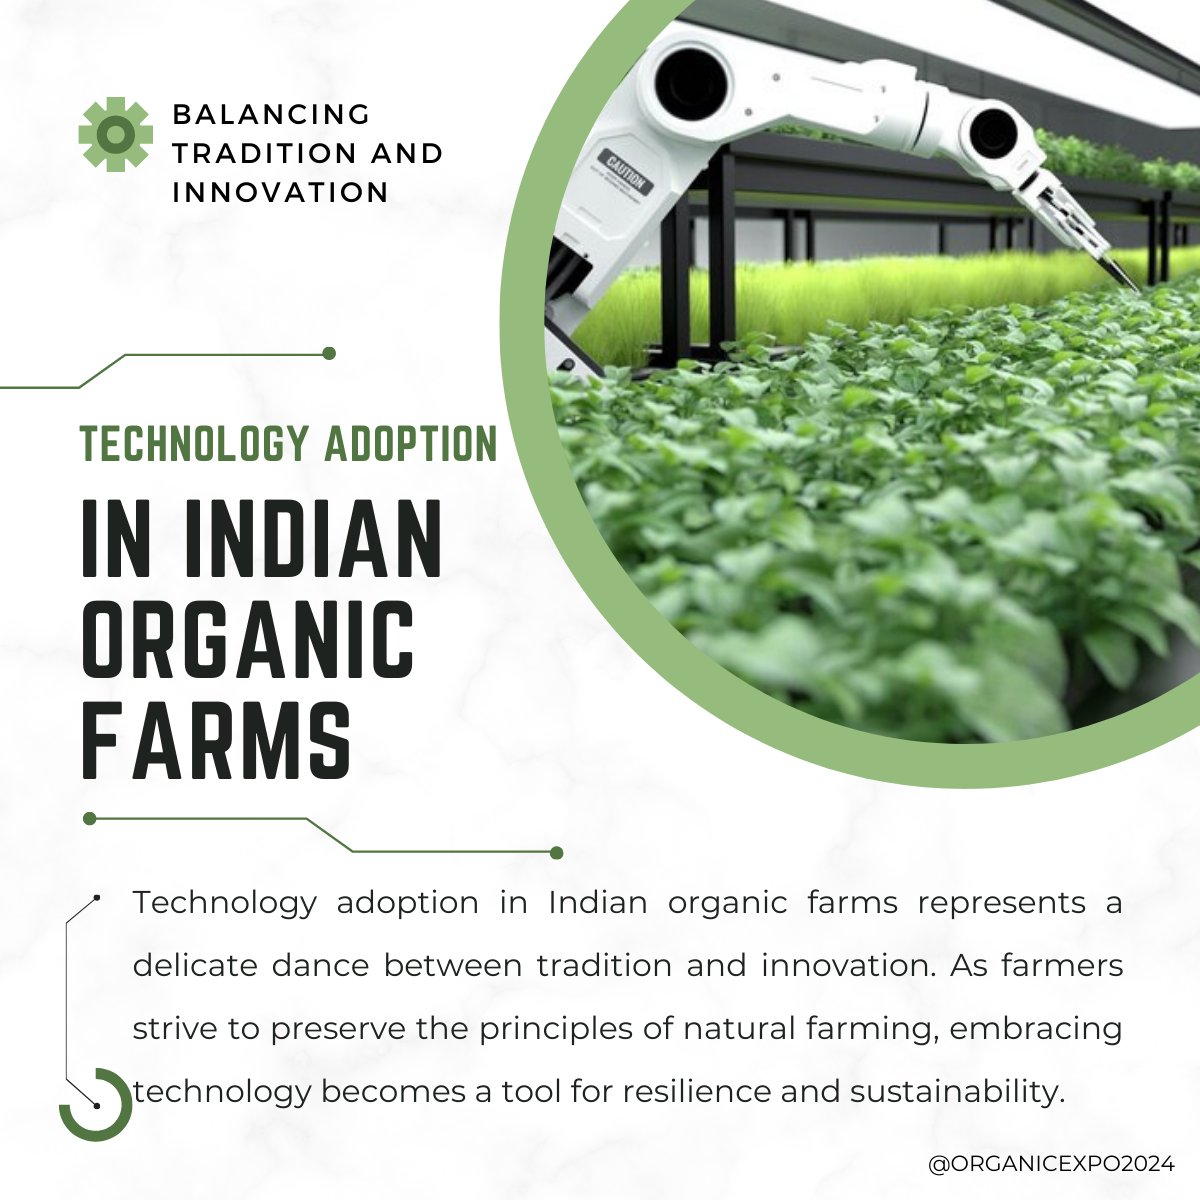 Can Organic Farming Ensure Sustainable Agriculture in India?